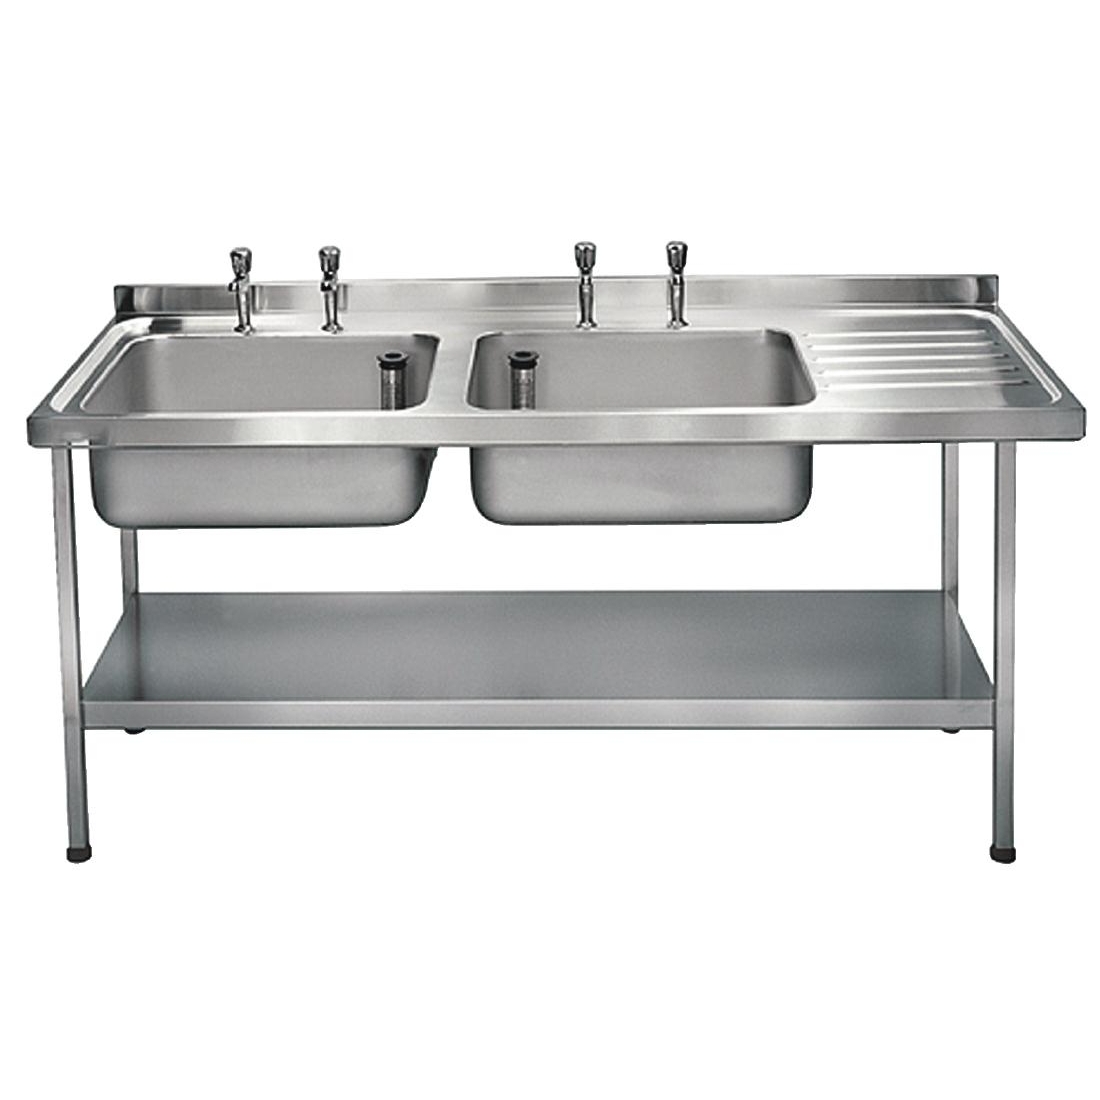 Franke Sissons Stainless Steel Sink Double Right Hand Drainer 1800x650mm